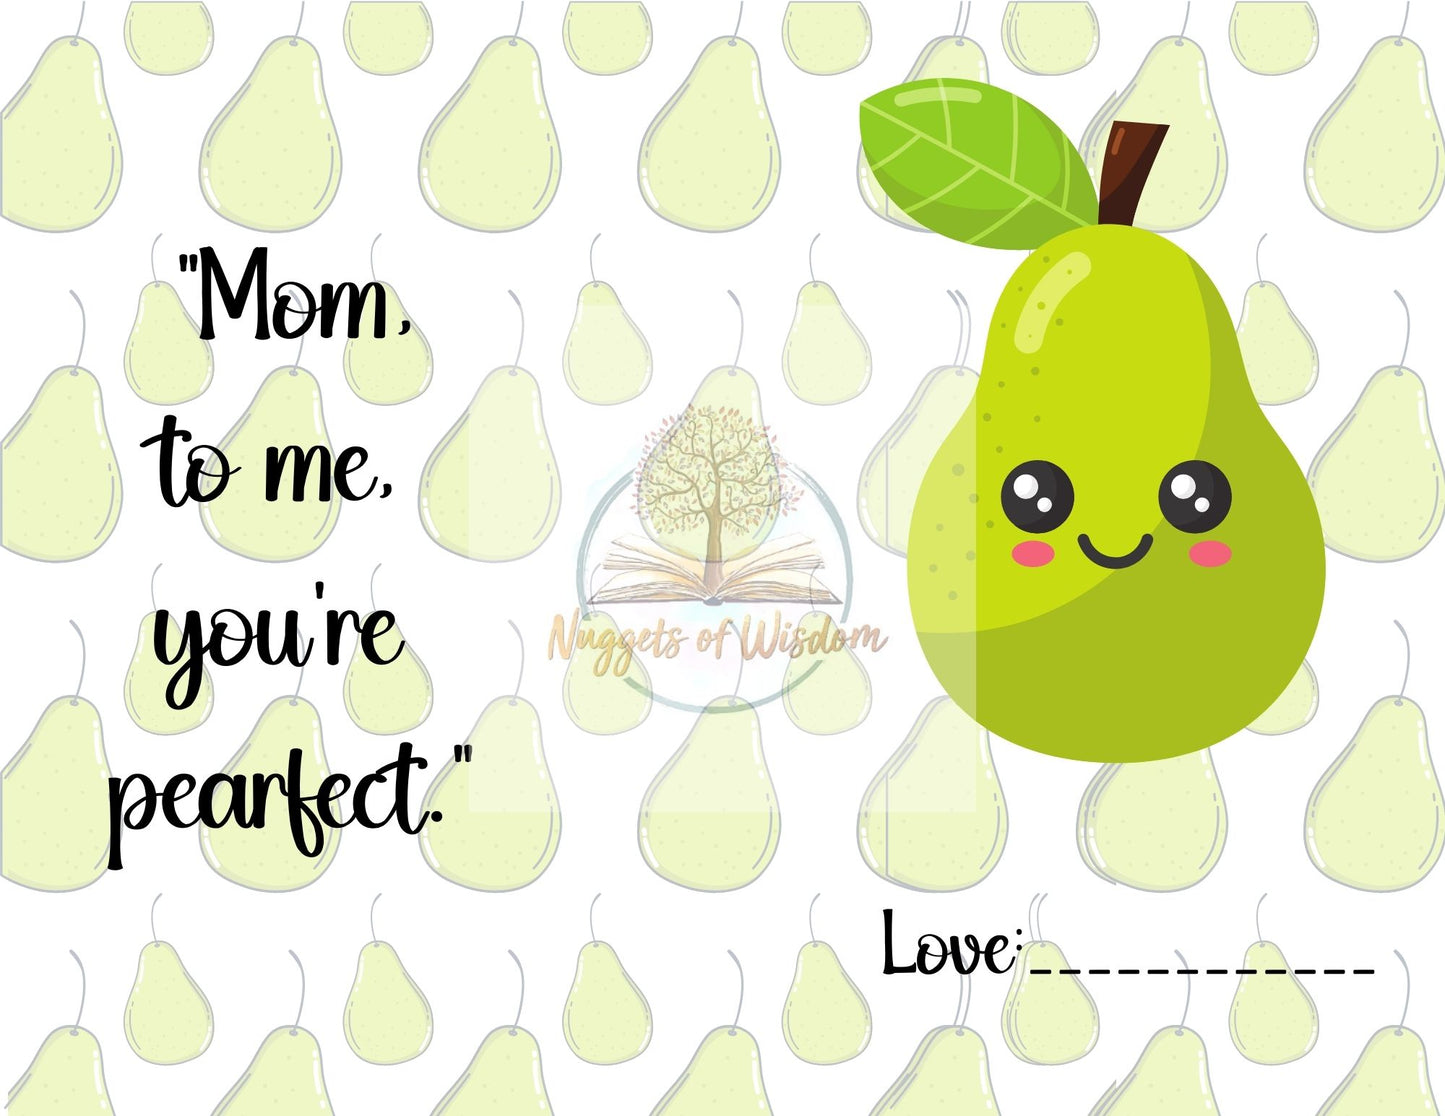 Mother's Day Card Sets: 11 Pre-Made Cards Ready for Mother's Day!